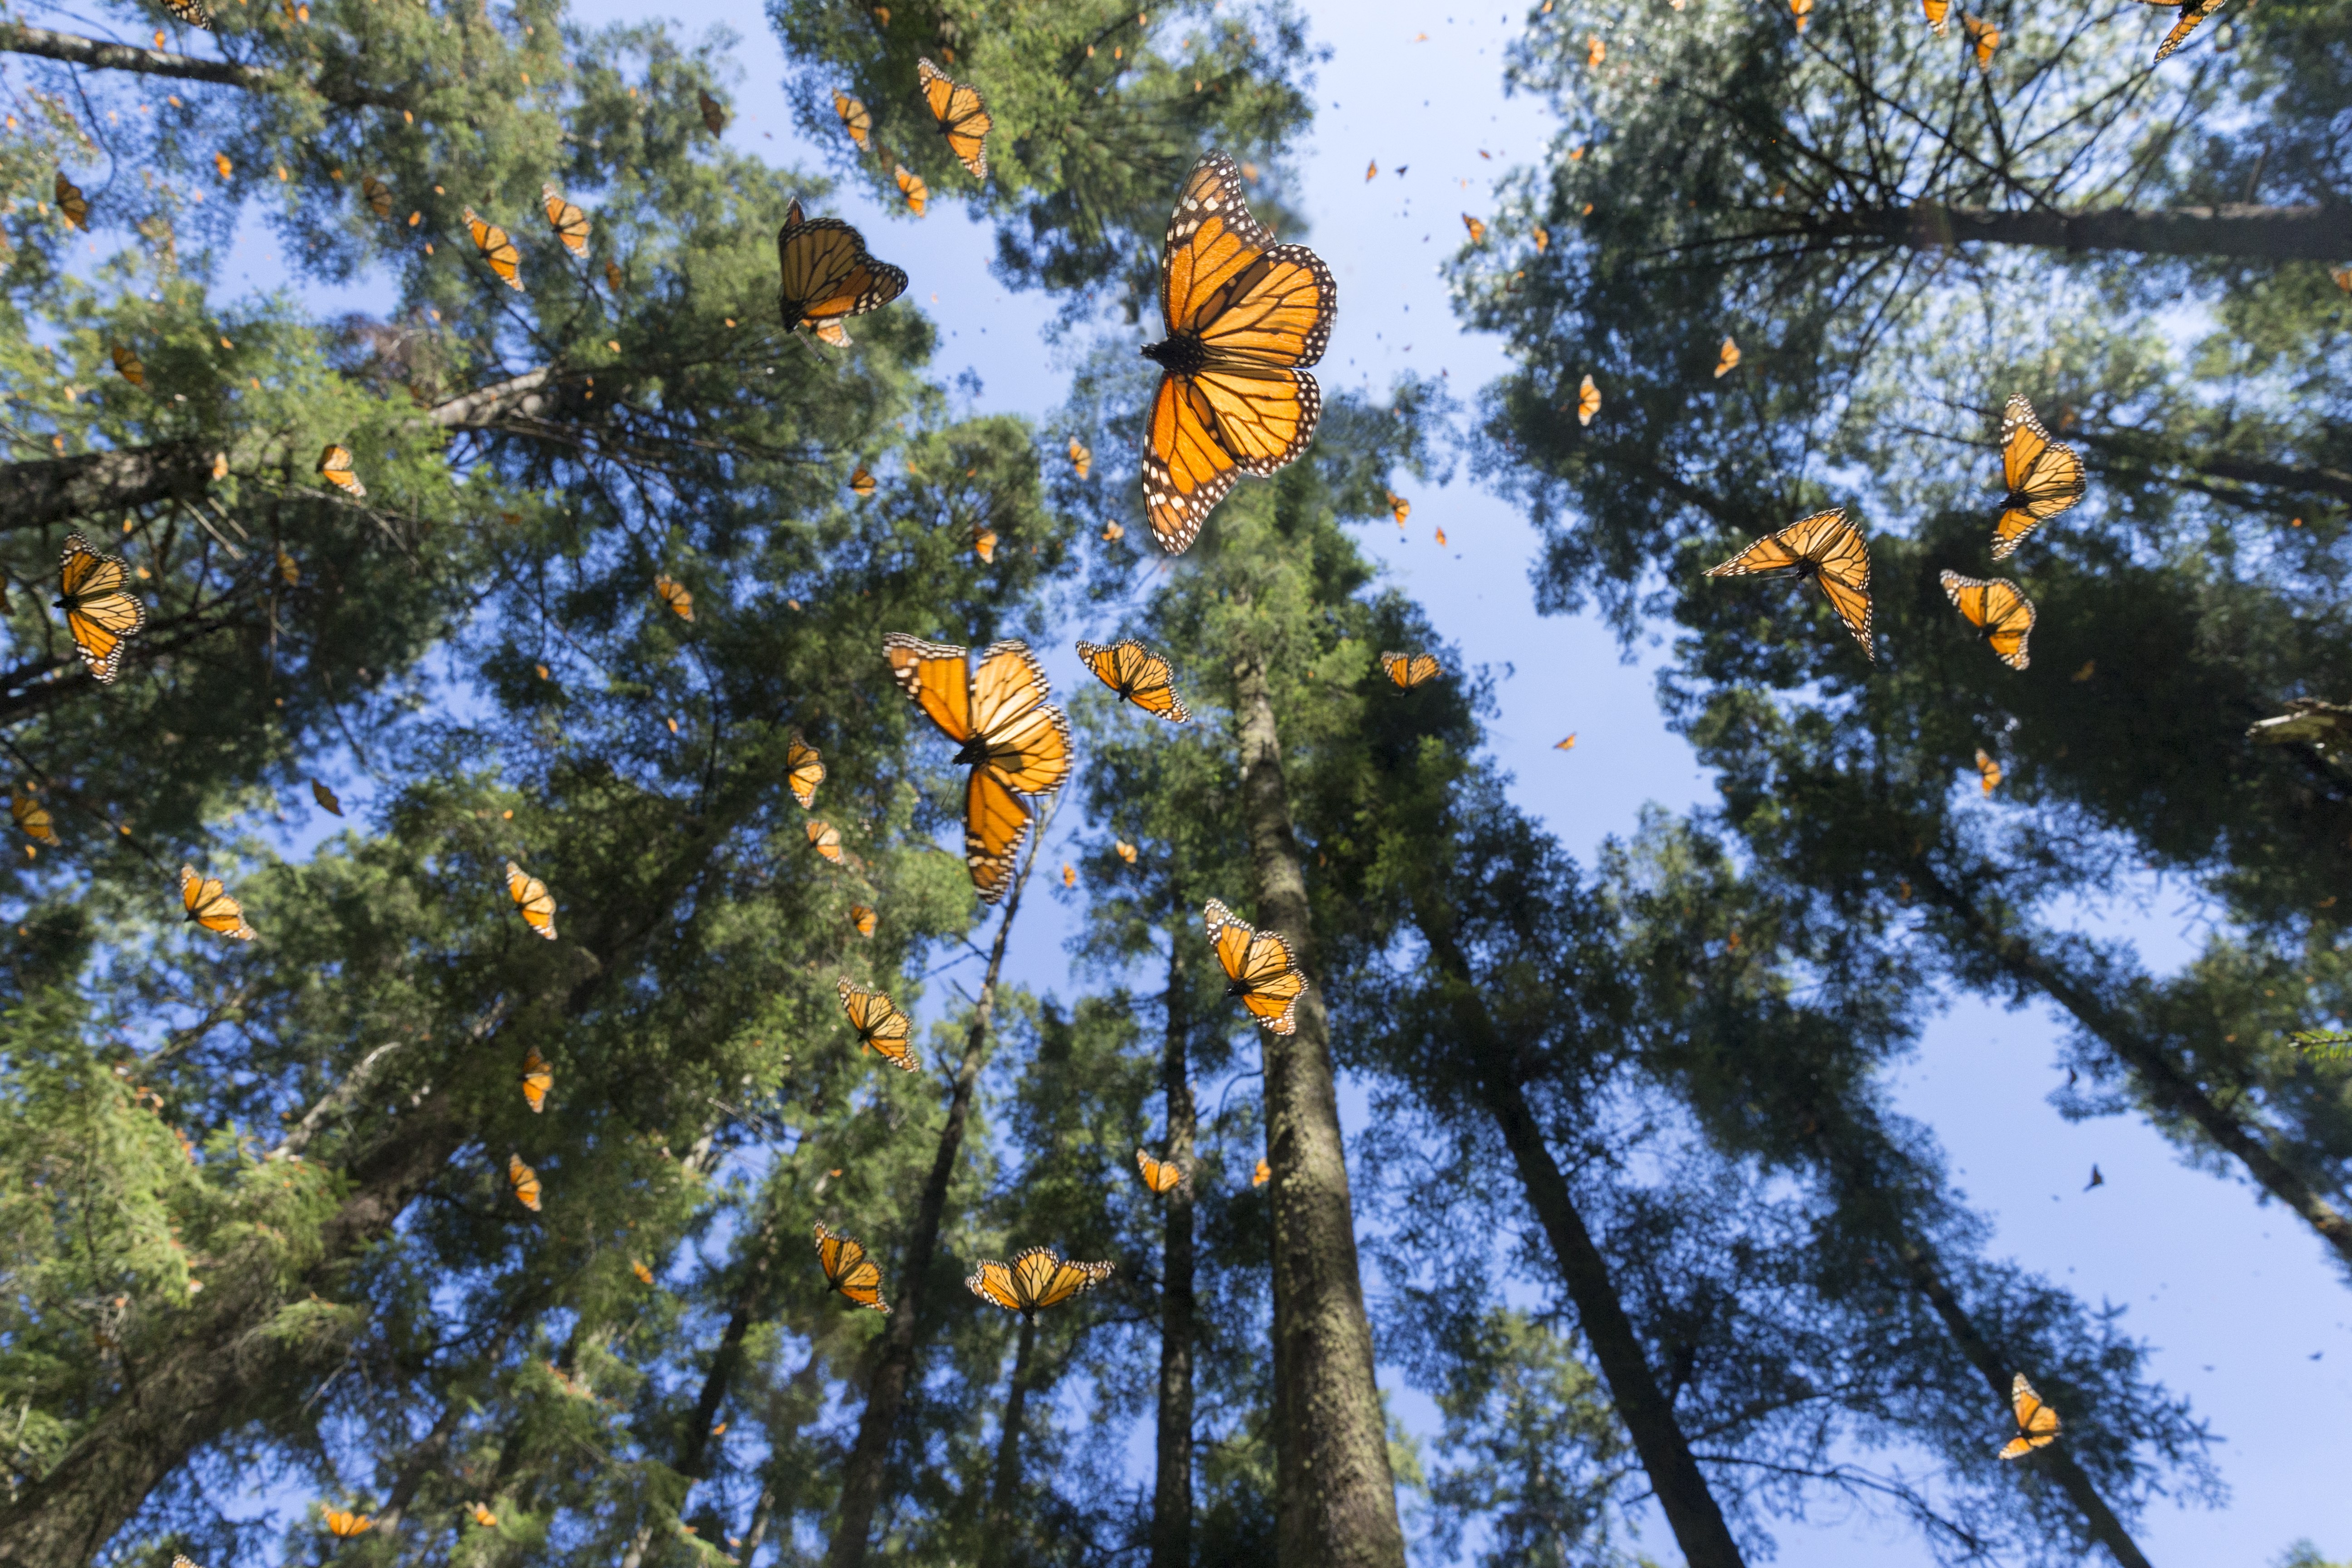 AFBF Welcomes Continued Monitoring of Monarch Butterfly